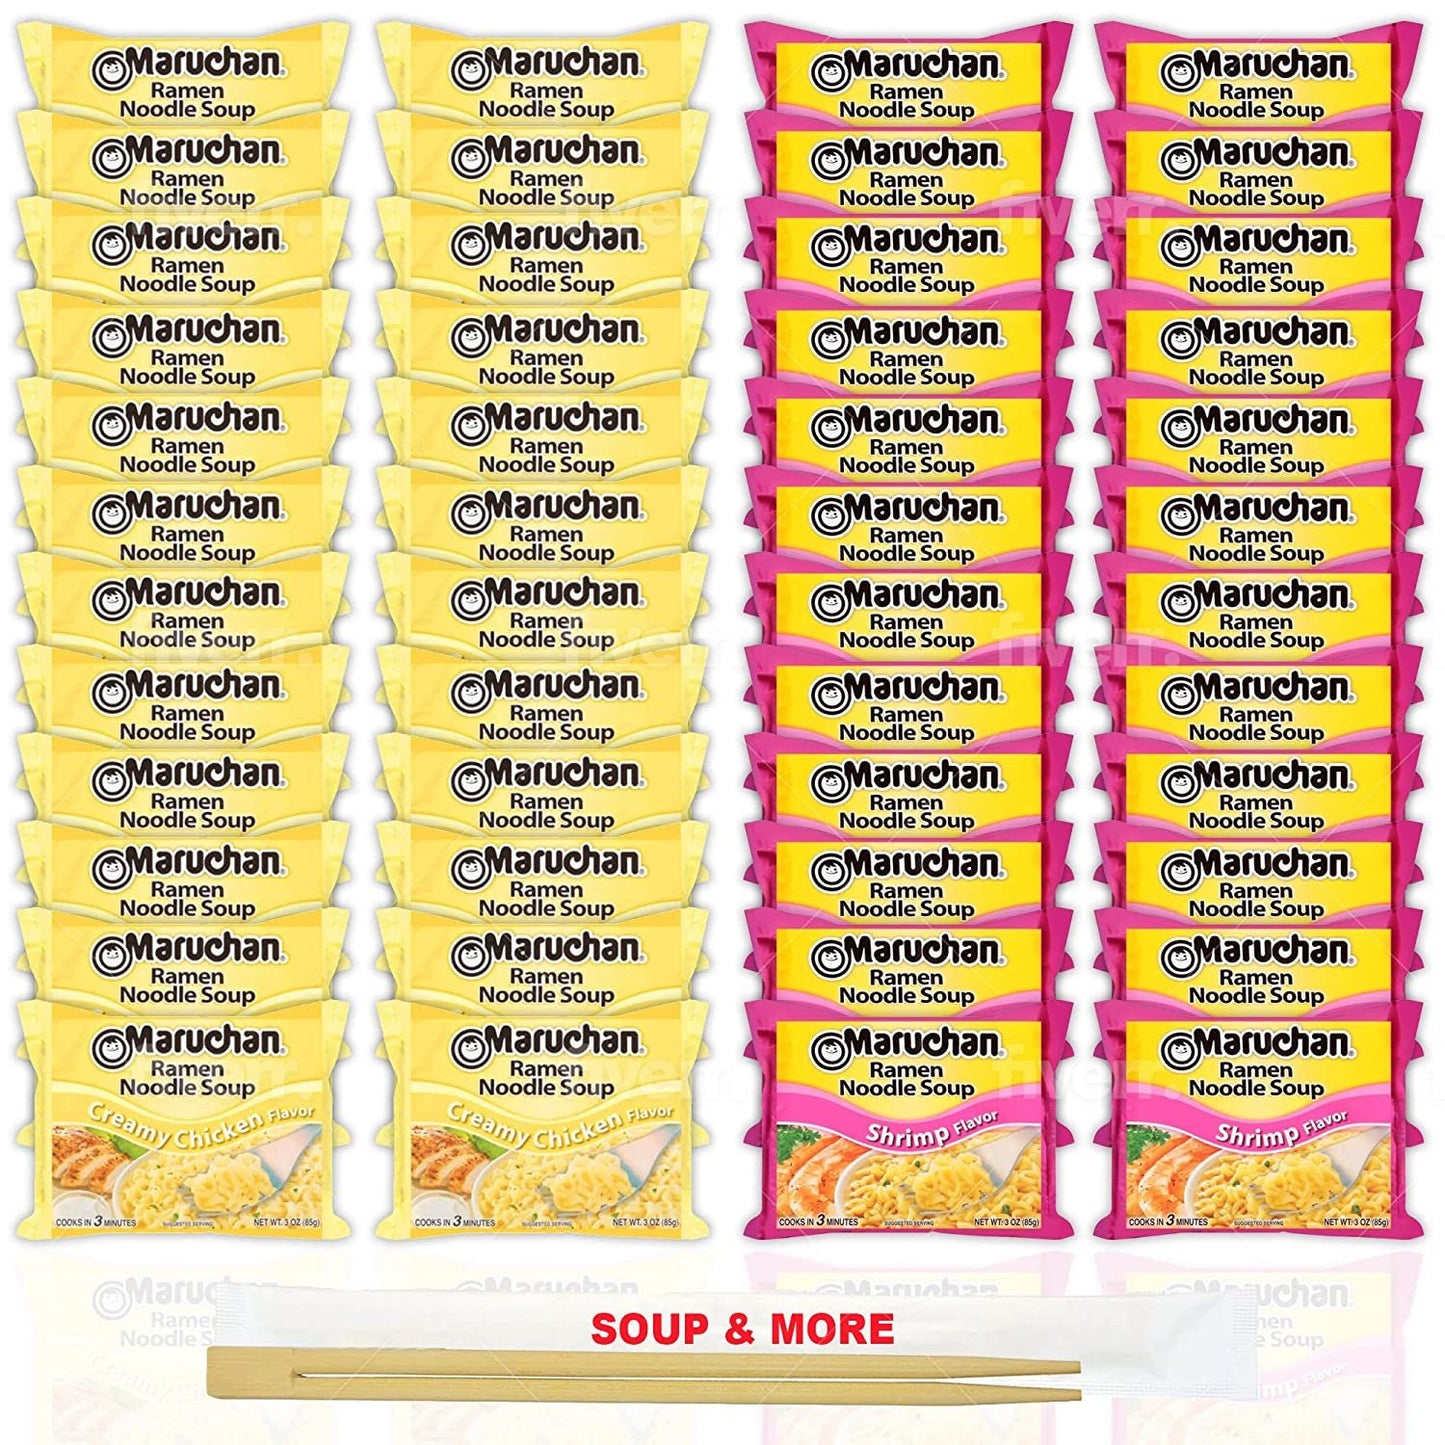 Maruchan Ramen Instant Noodle Soup Variety, 2 Flavors - 24 Packs Creamy Chicken & 24 Packs Shrimp , 3 Ounce Single Servings Lunch / Dinner Variety